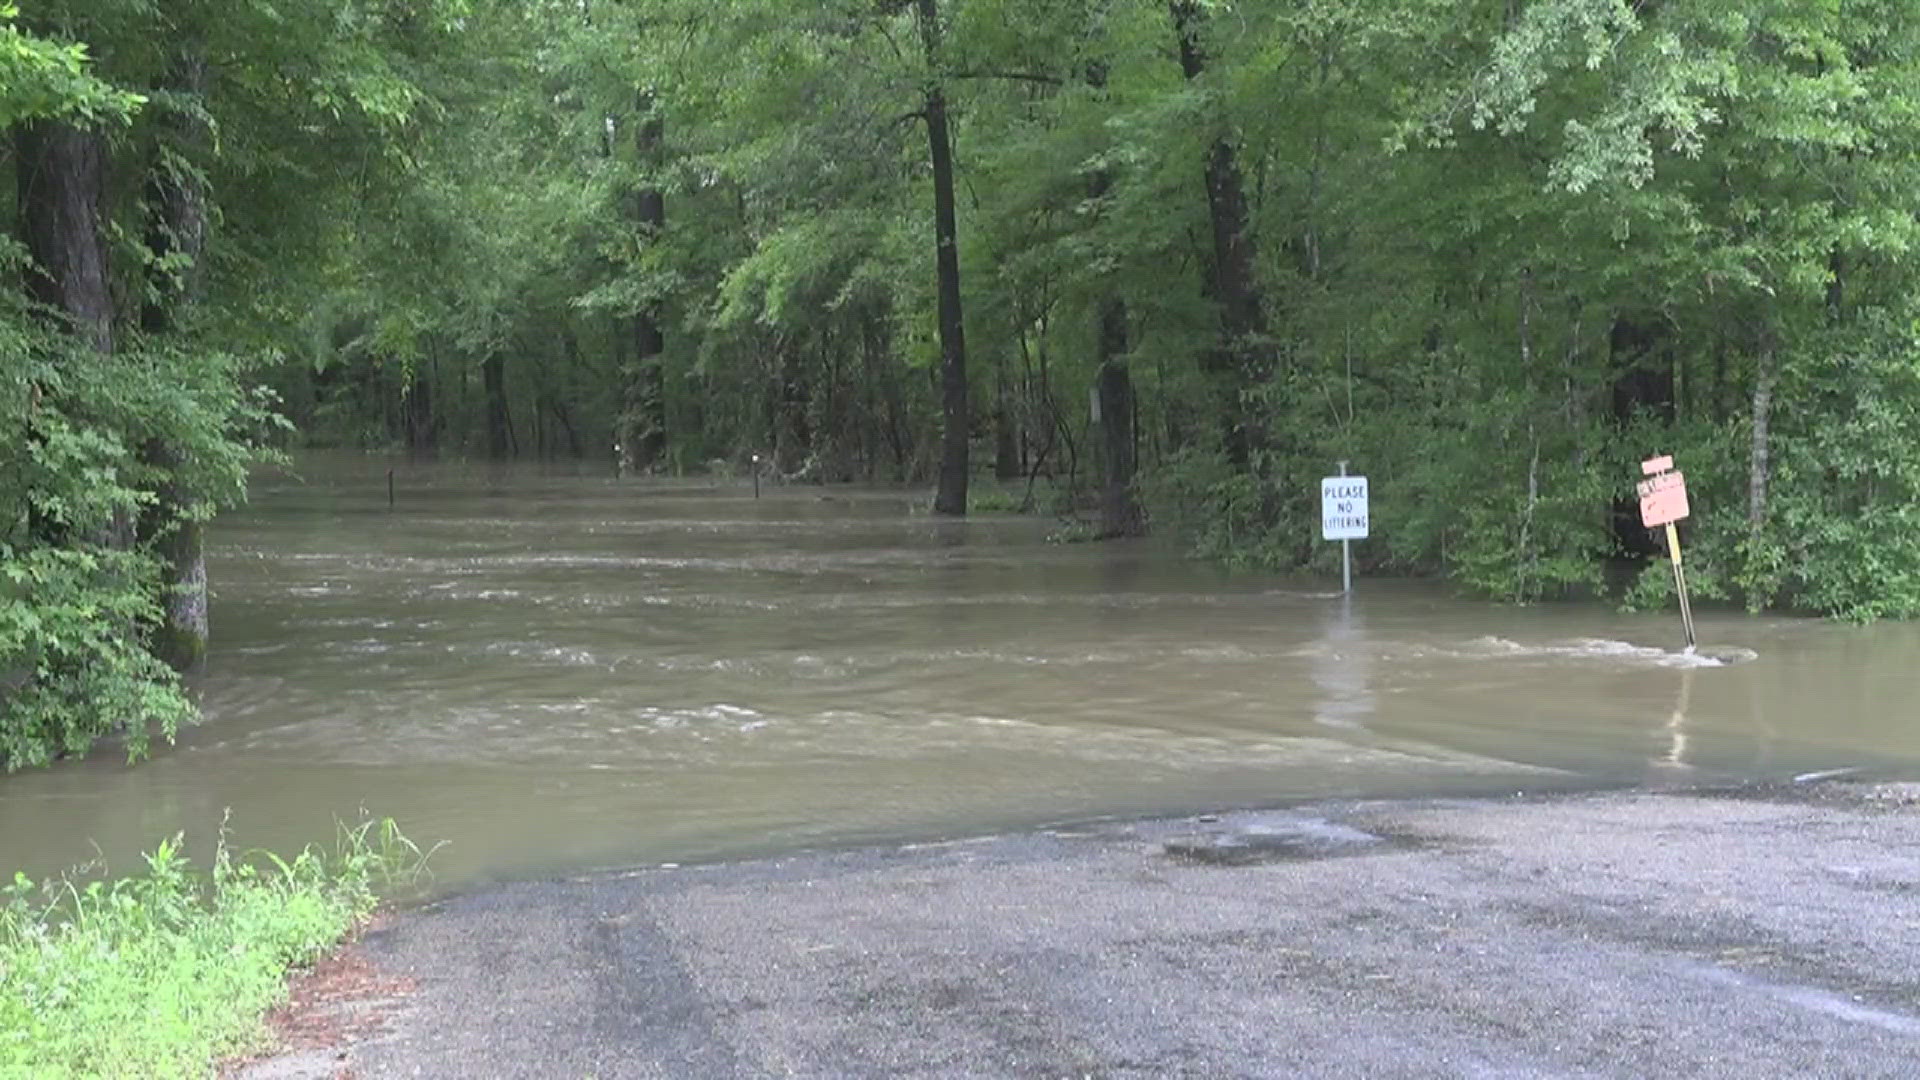 HCEM says multiple locations in Hardin County will experience flooding.